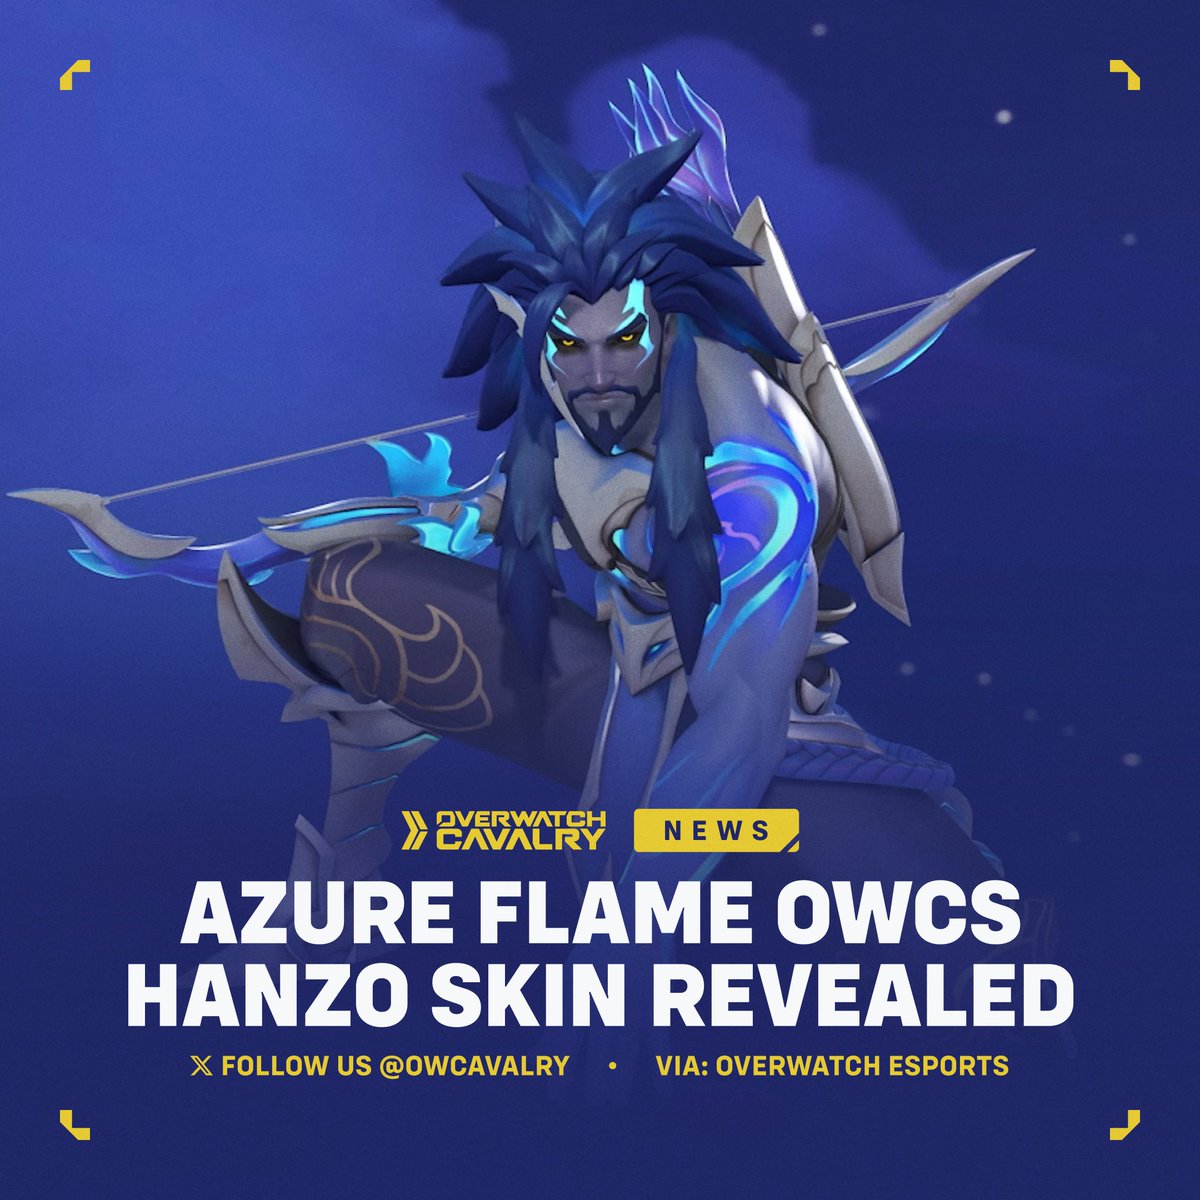 New #Overwatch2 Azure Flame Hanzo Skin Revealed 🏹 This all-new Legendary Skin will be a part of #OWCS crowdfunding efforts and will be released for the first Major at @DreamHack Dallas.